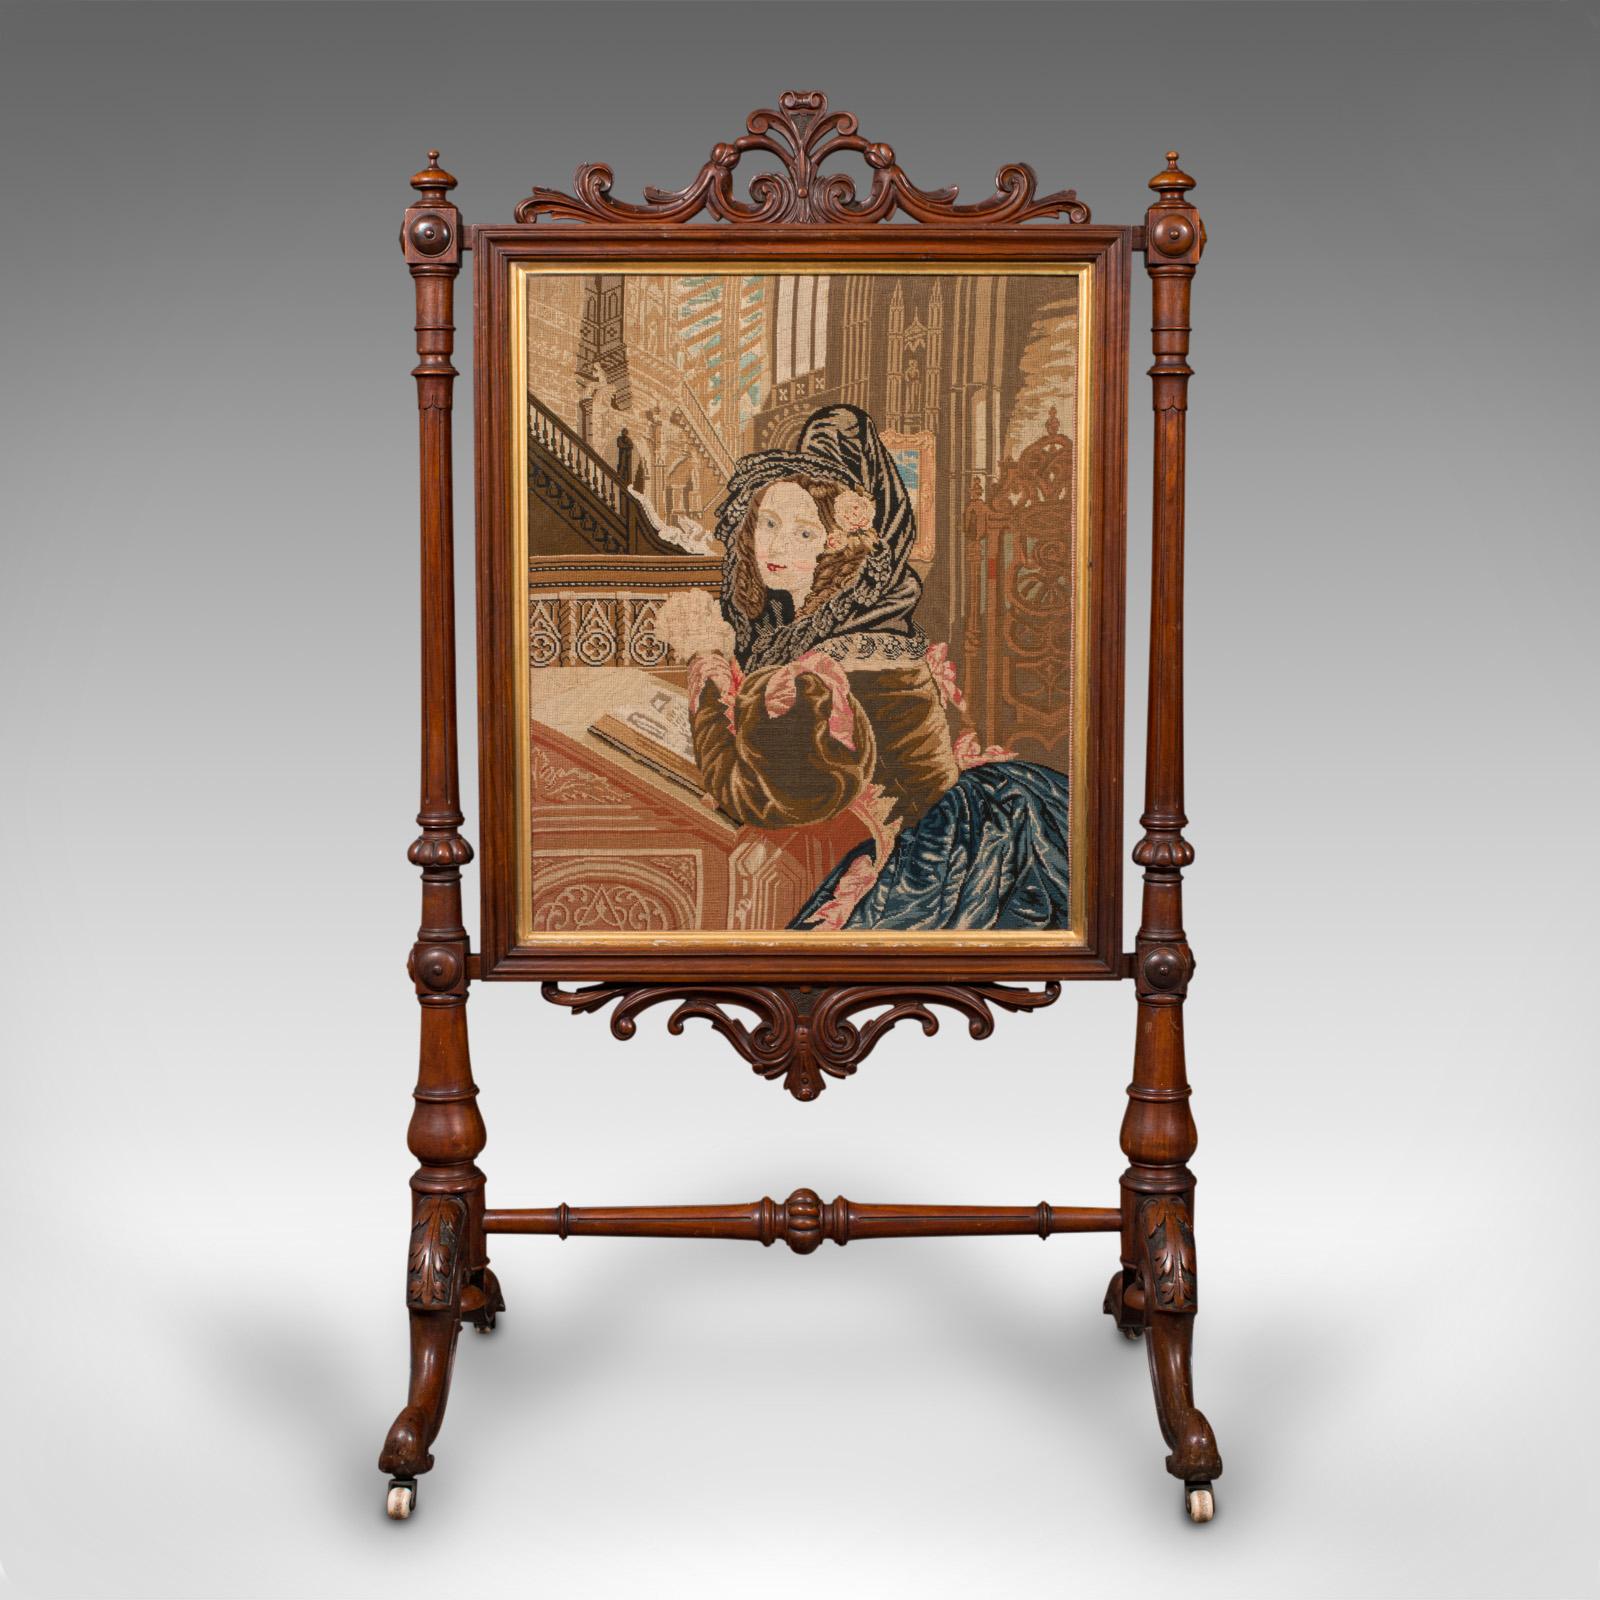 This is an antique tapestry fire screen. An English, walnut and needlepoint fireside panel, dating to the early Victorian period, circa 1840.
 
Exceptional frame quality with a striking embroidered portrait
Displays a desirable aged patina and in